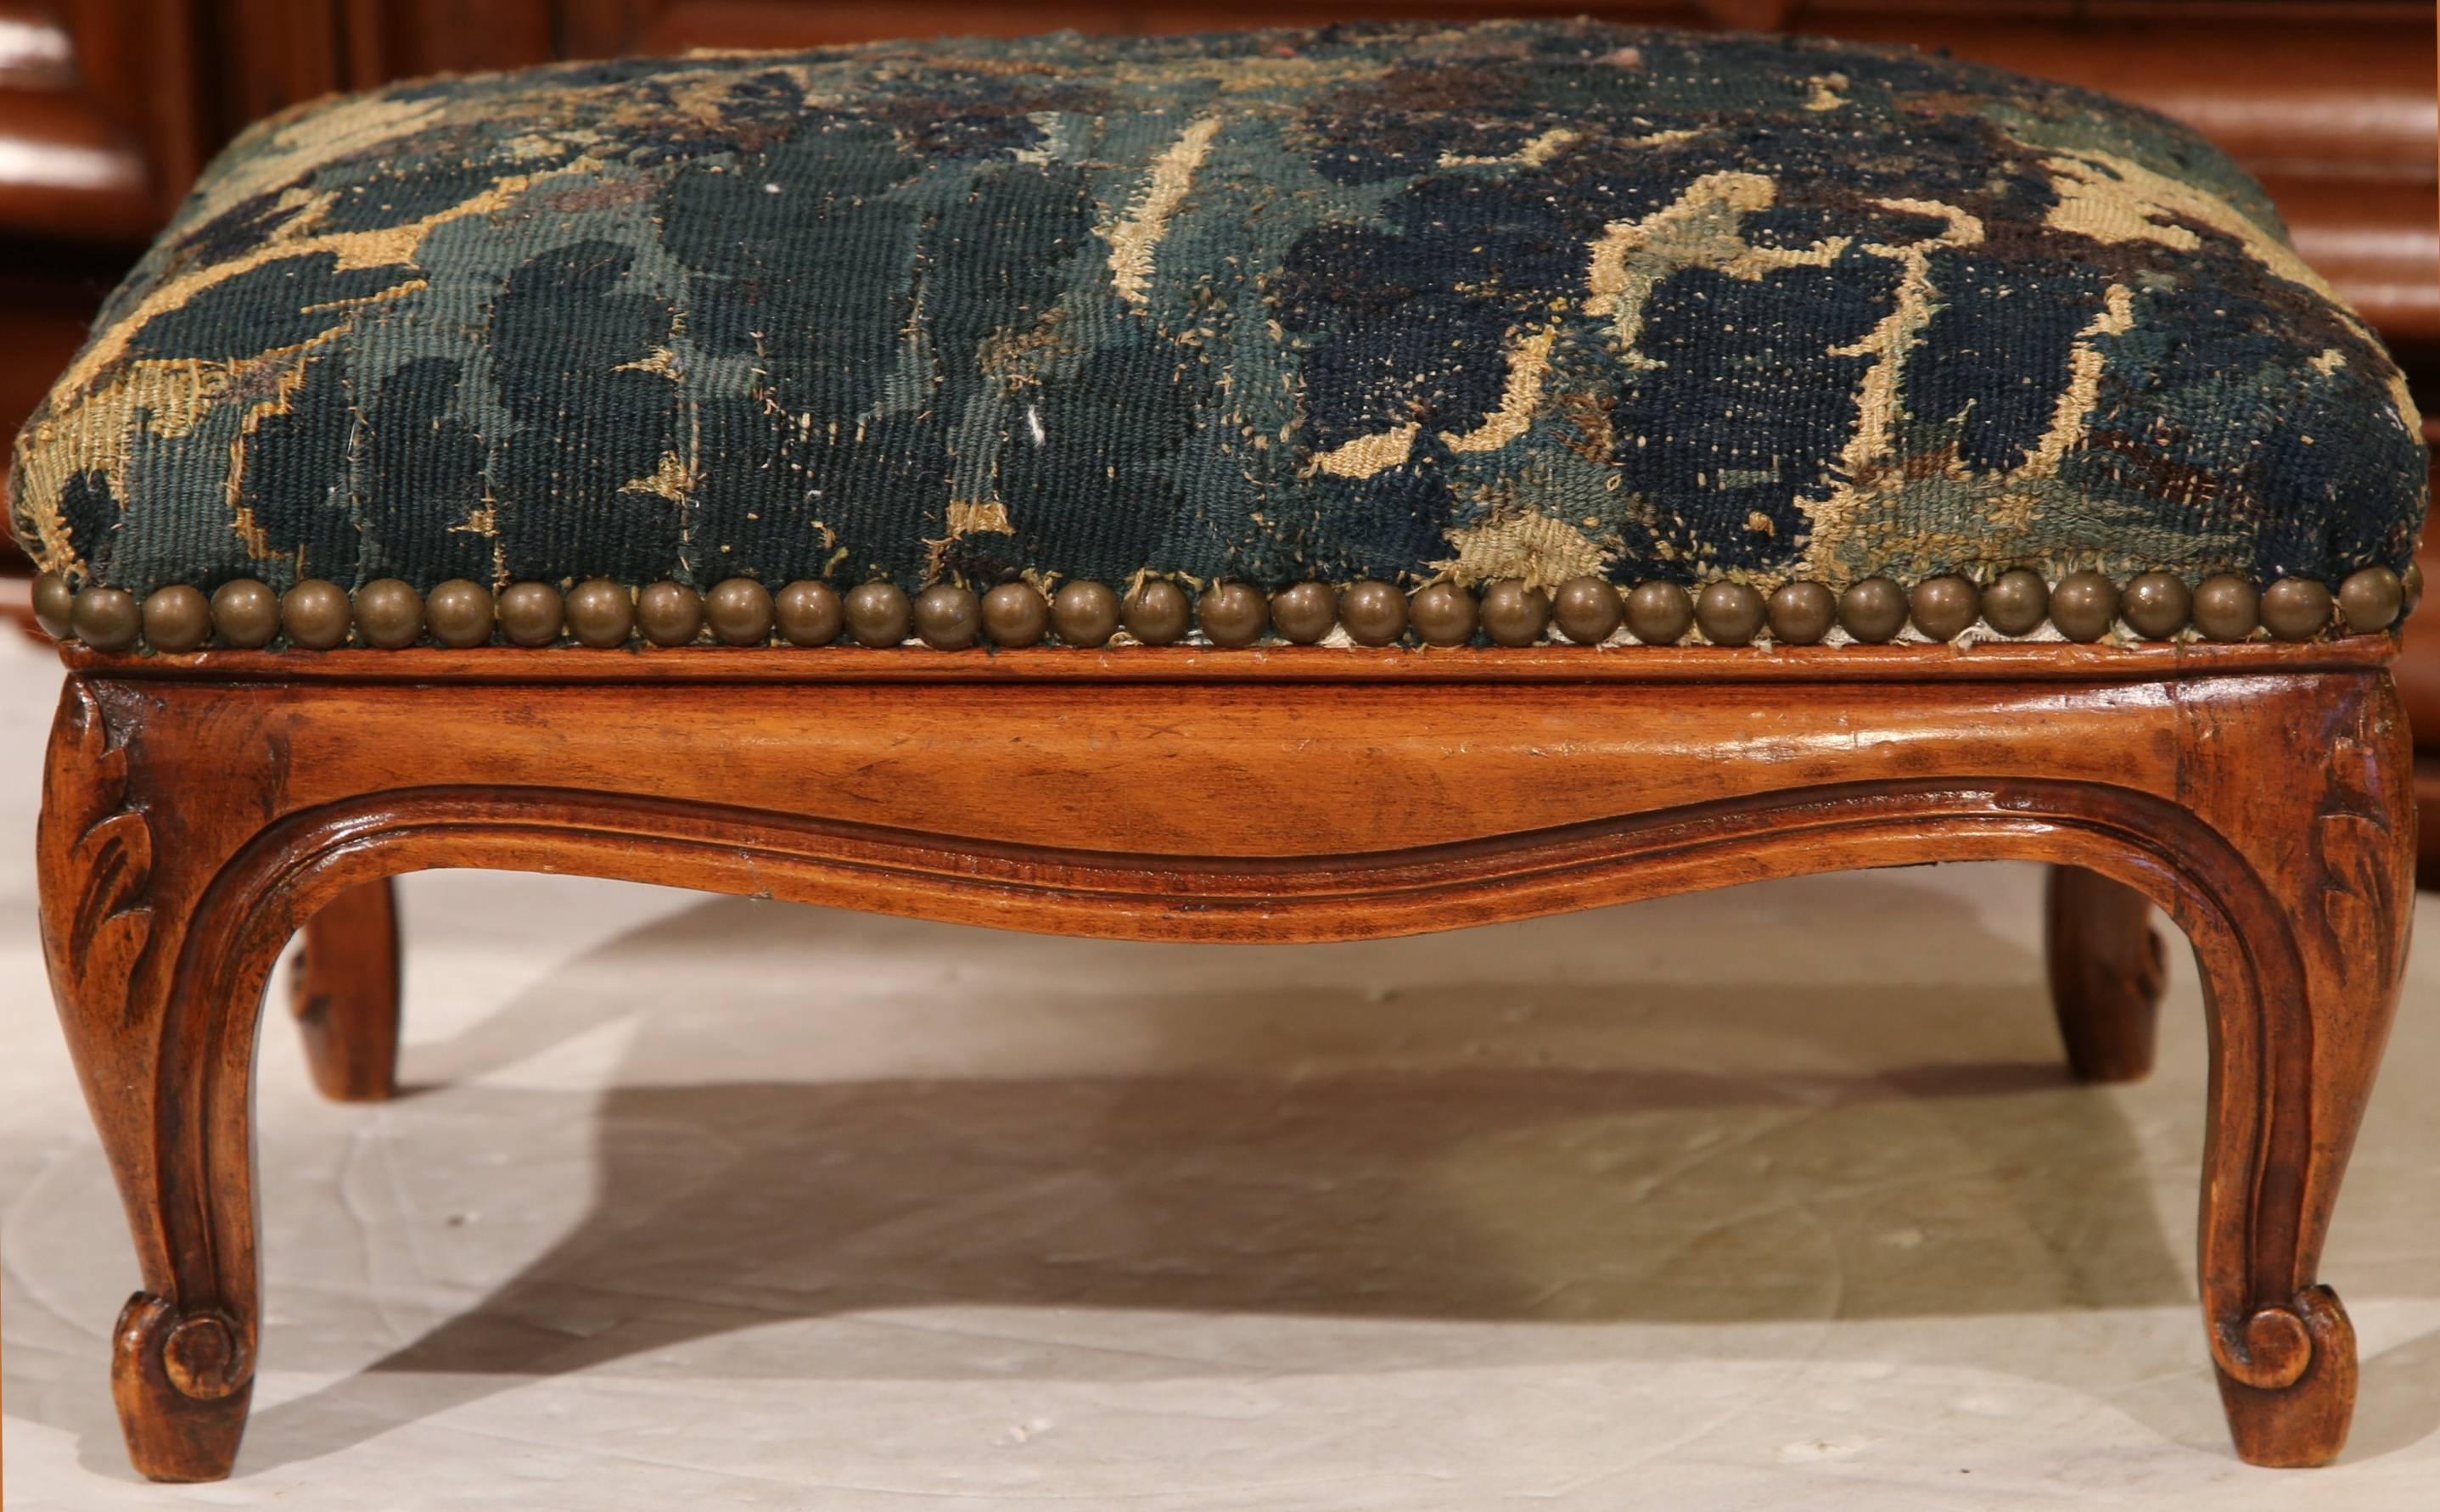 This elegant, antique stool from France, circa 1870, would make a wonderful addition to any home regardless of style. Reupholstered with 18th century Aubusson tapestry and embellished by patinated brass nail heads, the fruit wood stool flaunts a